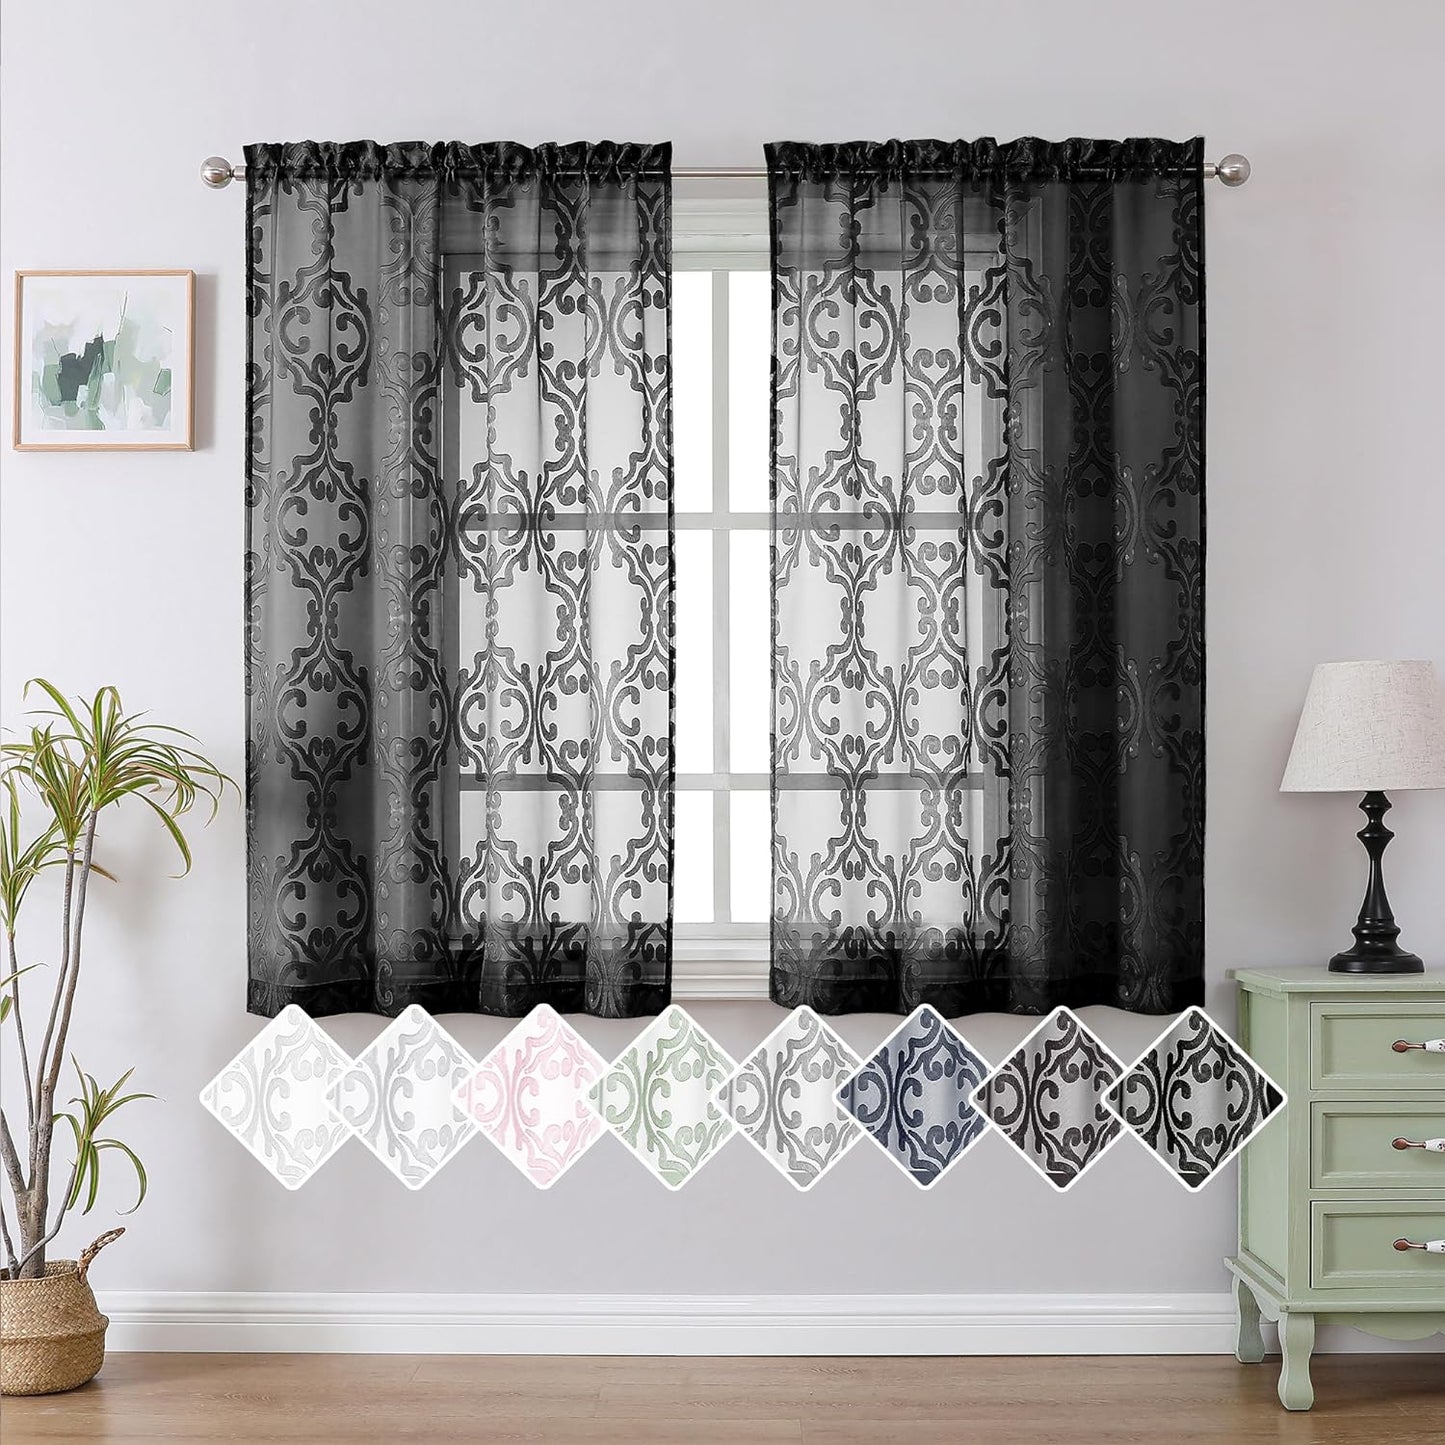 Aiyufeng Suri 2 Panels Sheer Sage Green Curtains 63 Inches Long, Light & Airy Privacy Textured Sheer Drapes, Dual Rod Pocket Voile Clipped Floral Luxury Panels for Bedroom Living Room, 42 X 63 Inch  Aiyufeng Black 2X42X54" 